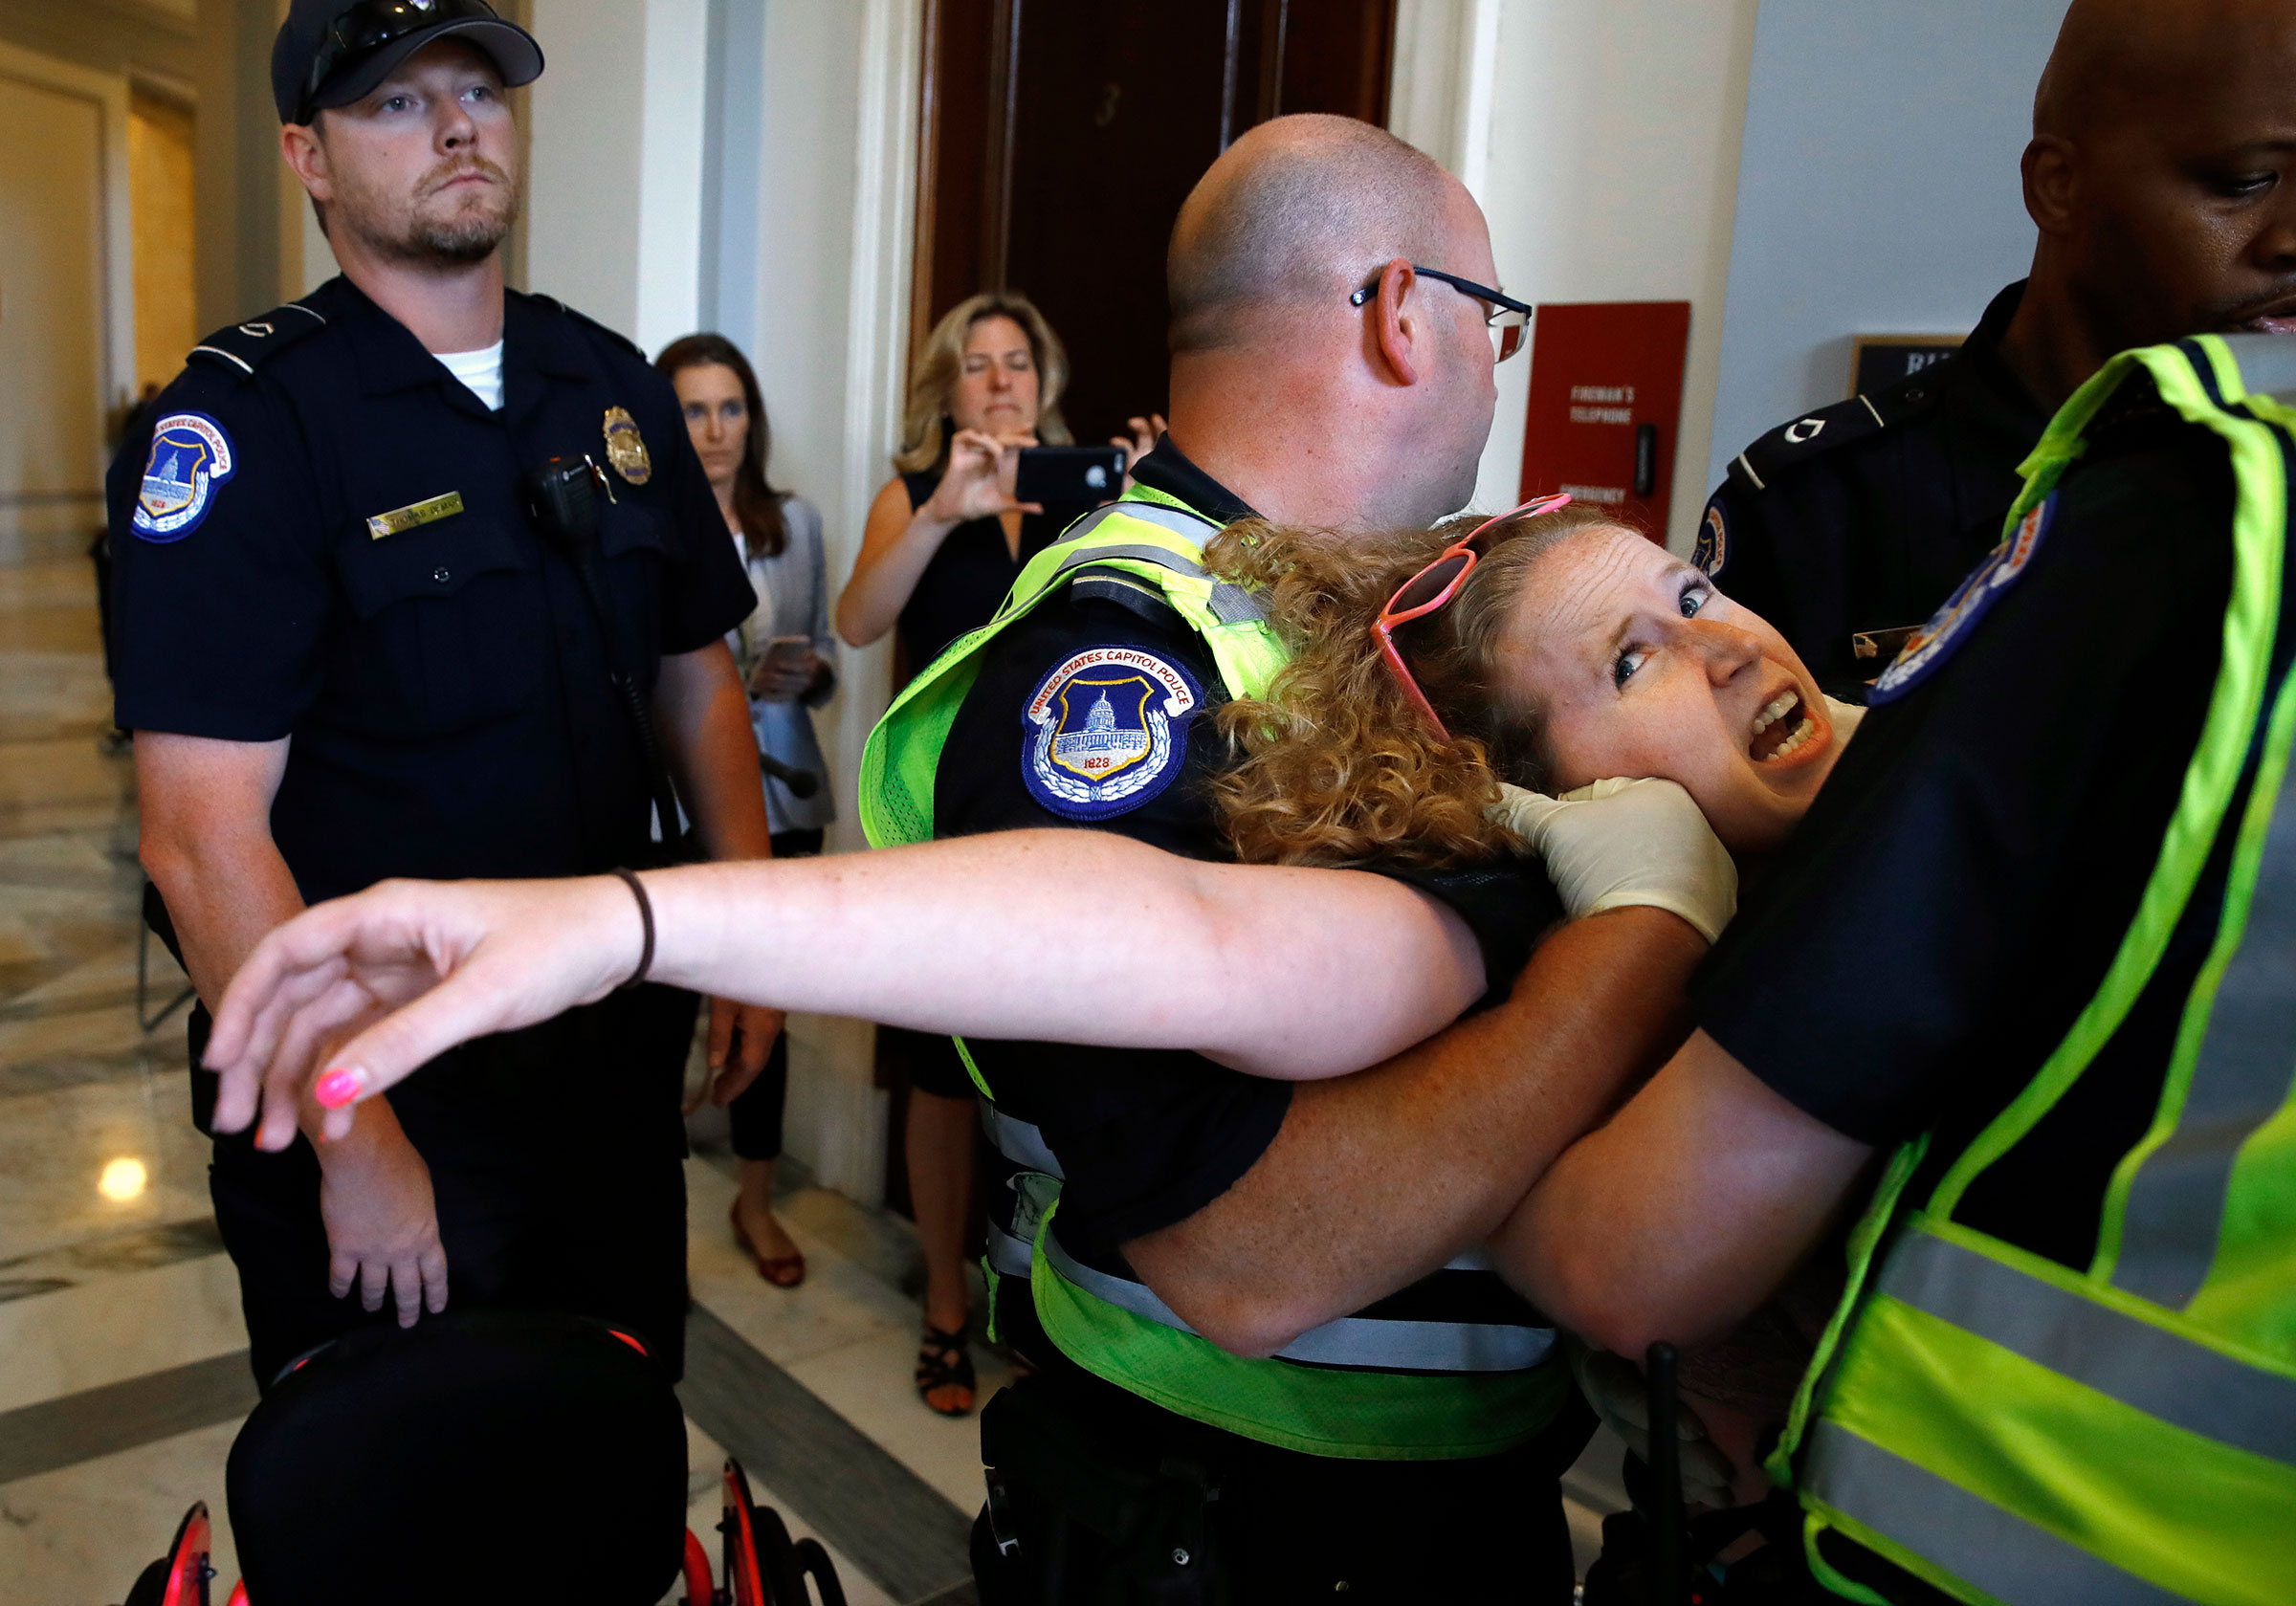 Stephanie Woodward, who has spina bifida and uses a wheelchair, is removed from a sit-in at Senate Majority Leader Mitch McConnell's office as she and other disability rights advocates protest proposed funding caps to Medicaid, on Capitol Hill on June 22, 2017. (Jacquelyn Martin—AP)